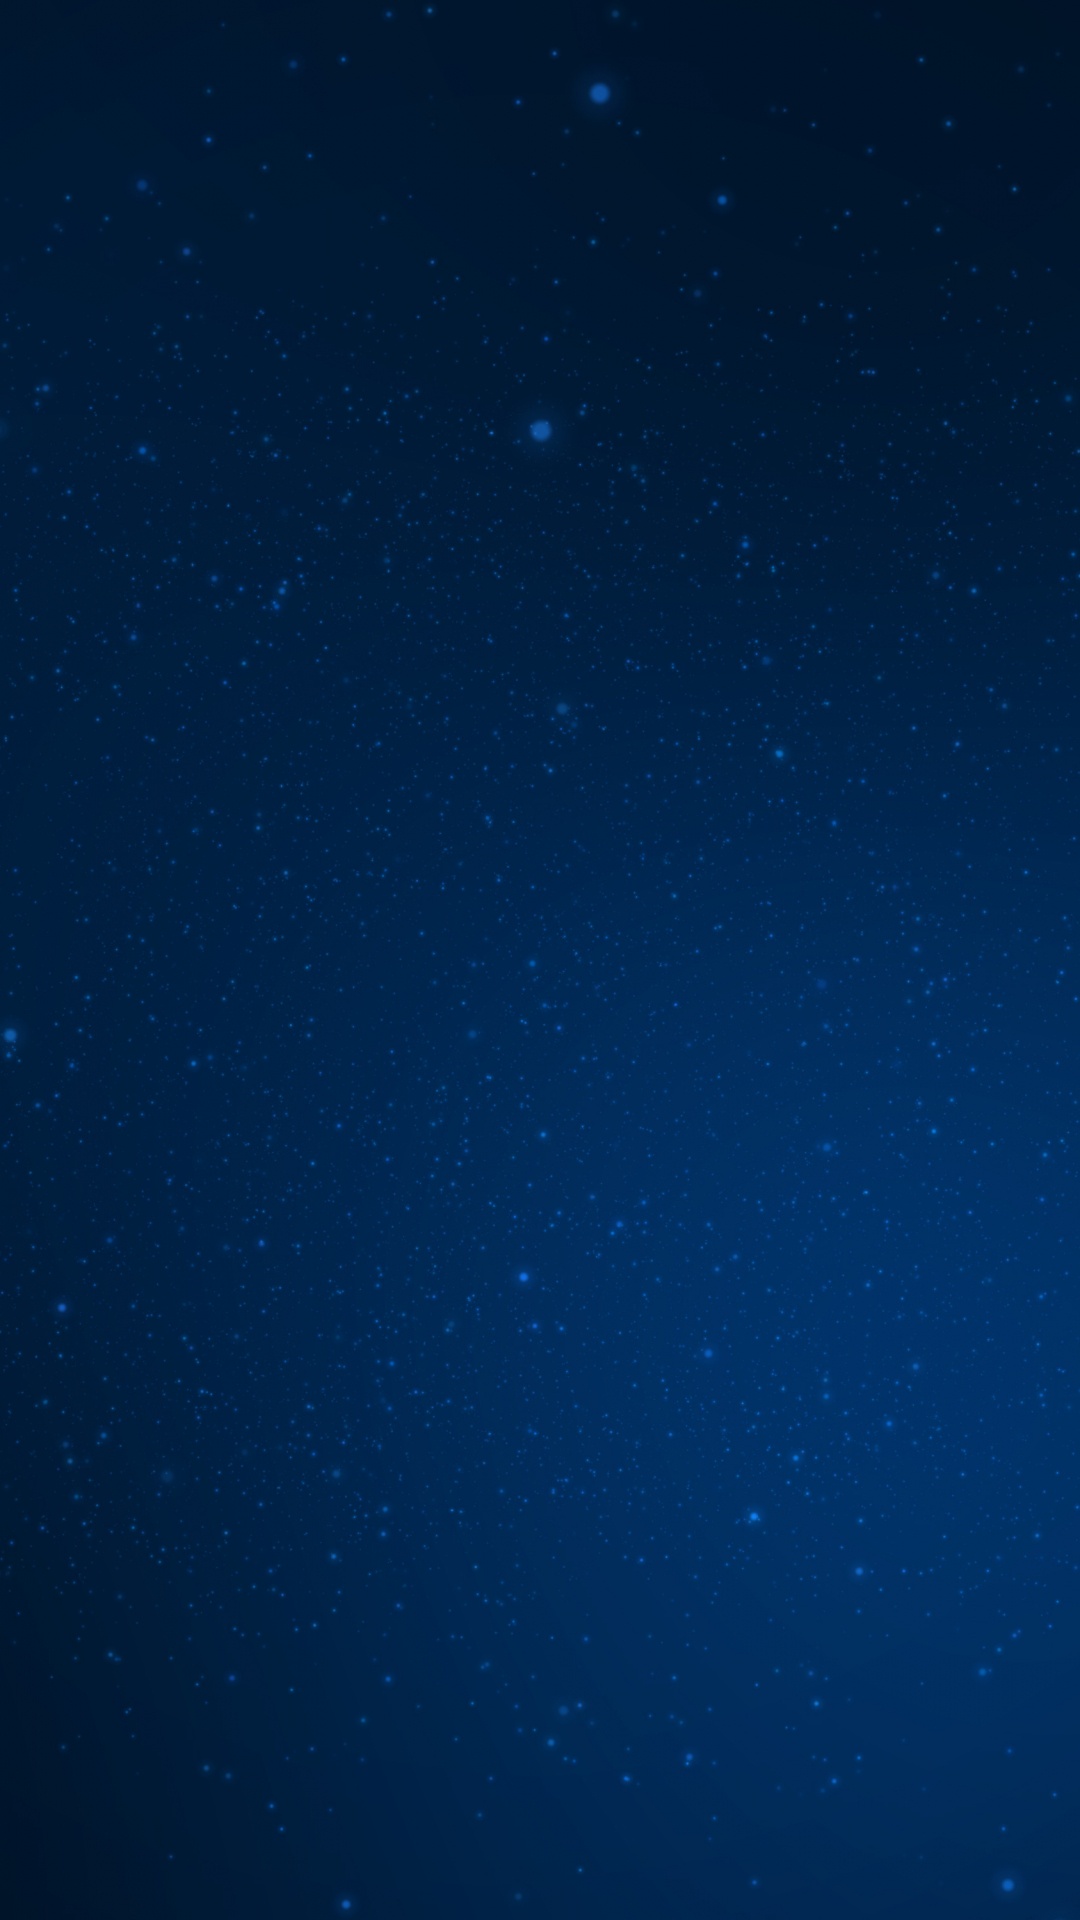 Blue Sky With Stars During Night Time. Wallpaper in 1080x1920 Resolution